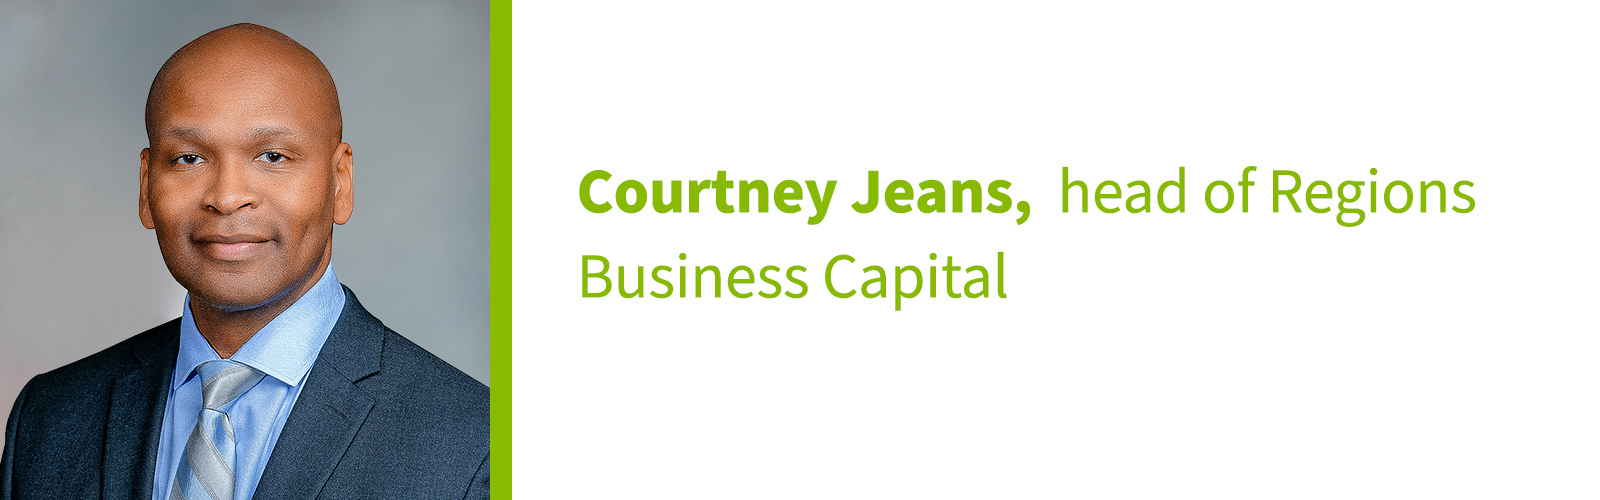 Courtney Jeans, head of Regions Business Capital